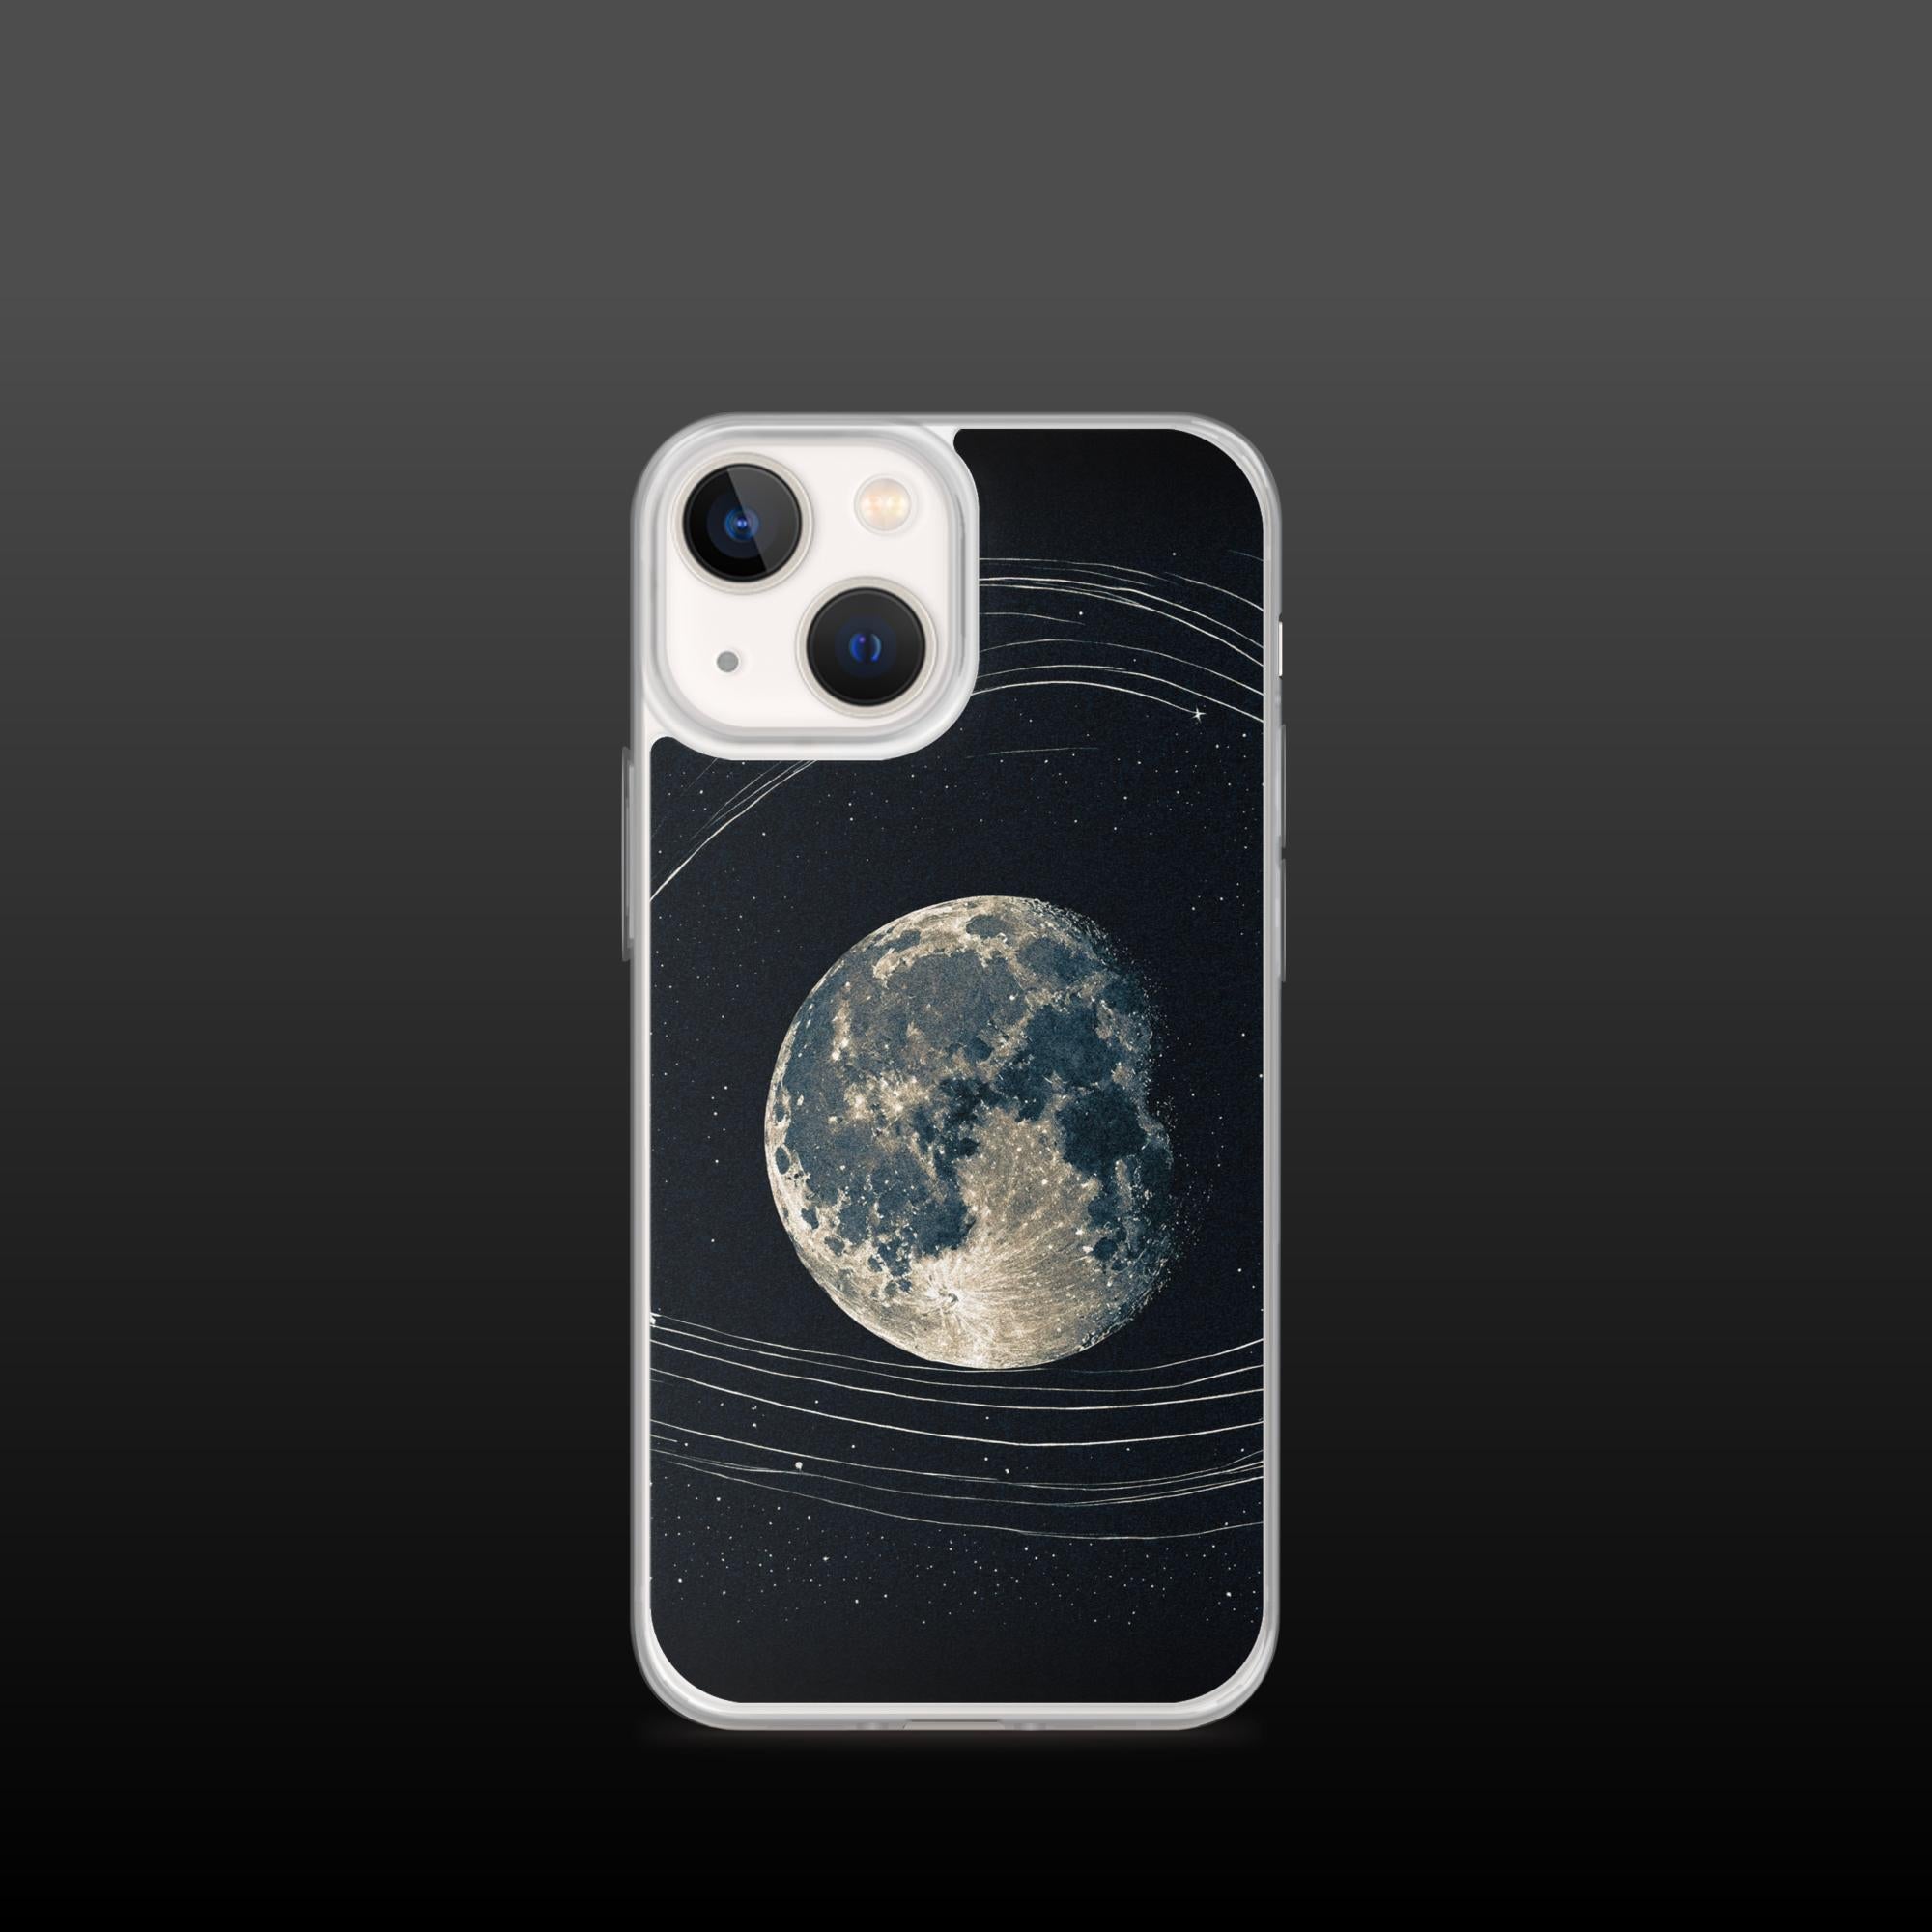 "Round the moon" clear iphone case - Clear iphone case - Ever colorful